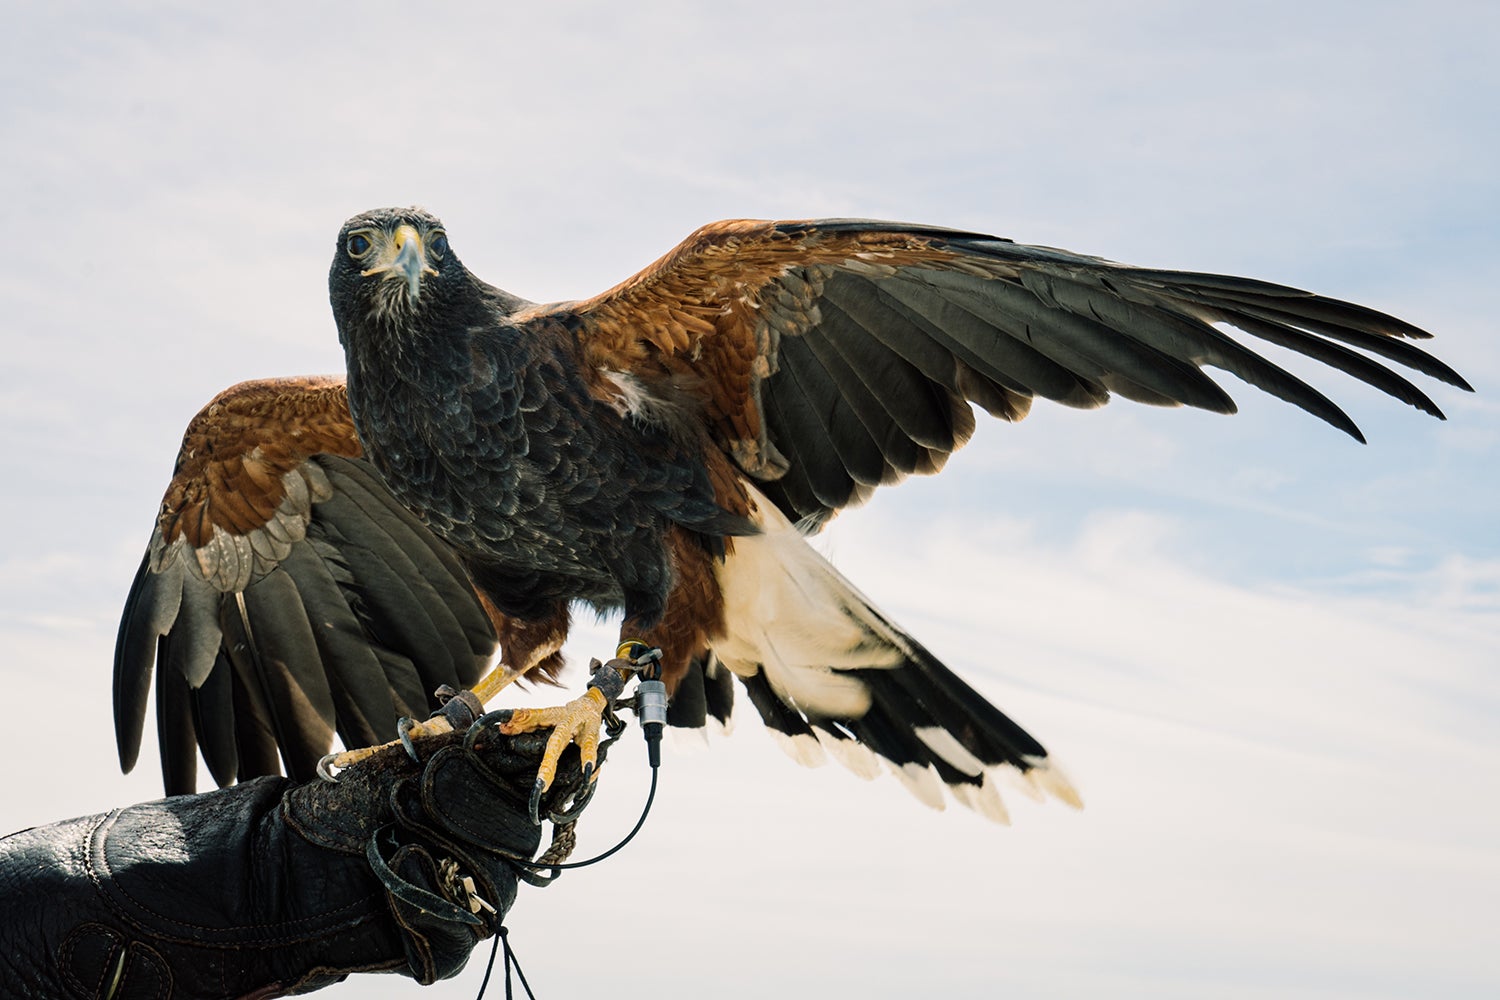 Breaking News cease-up of Harris's hawk on gloved hand